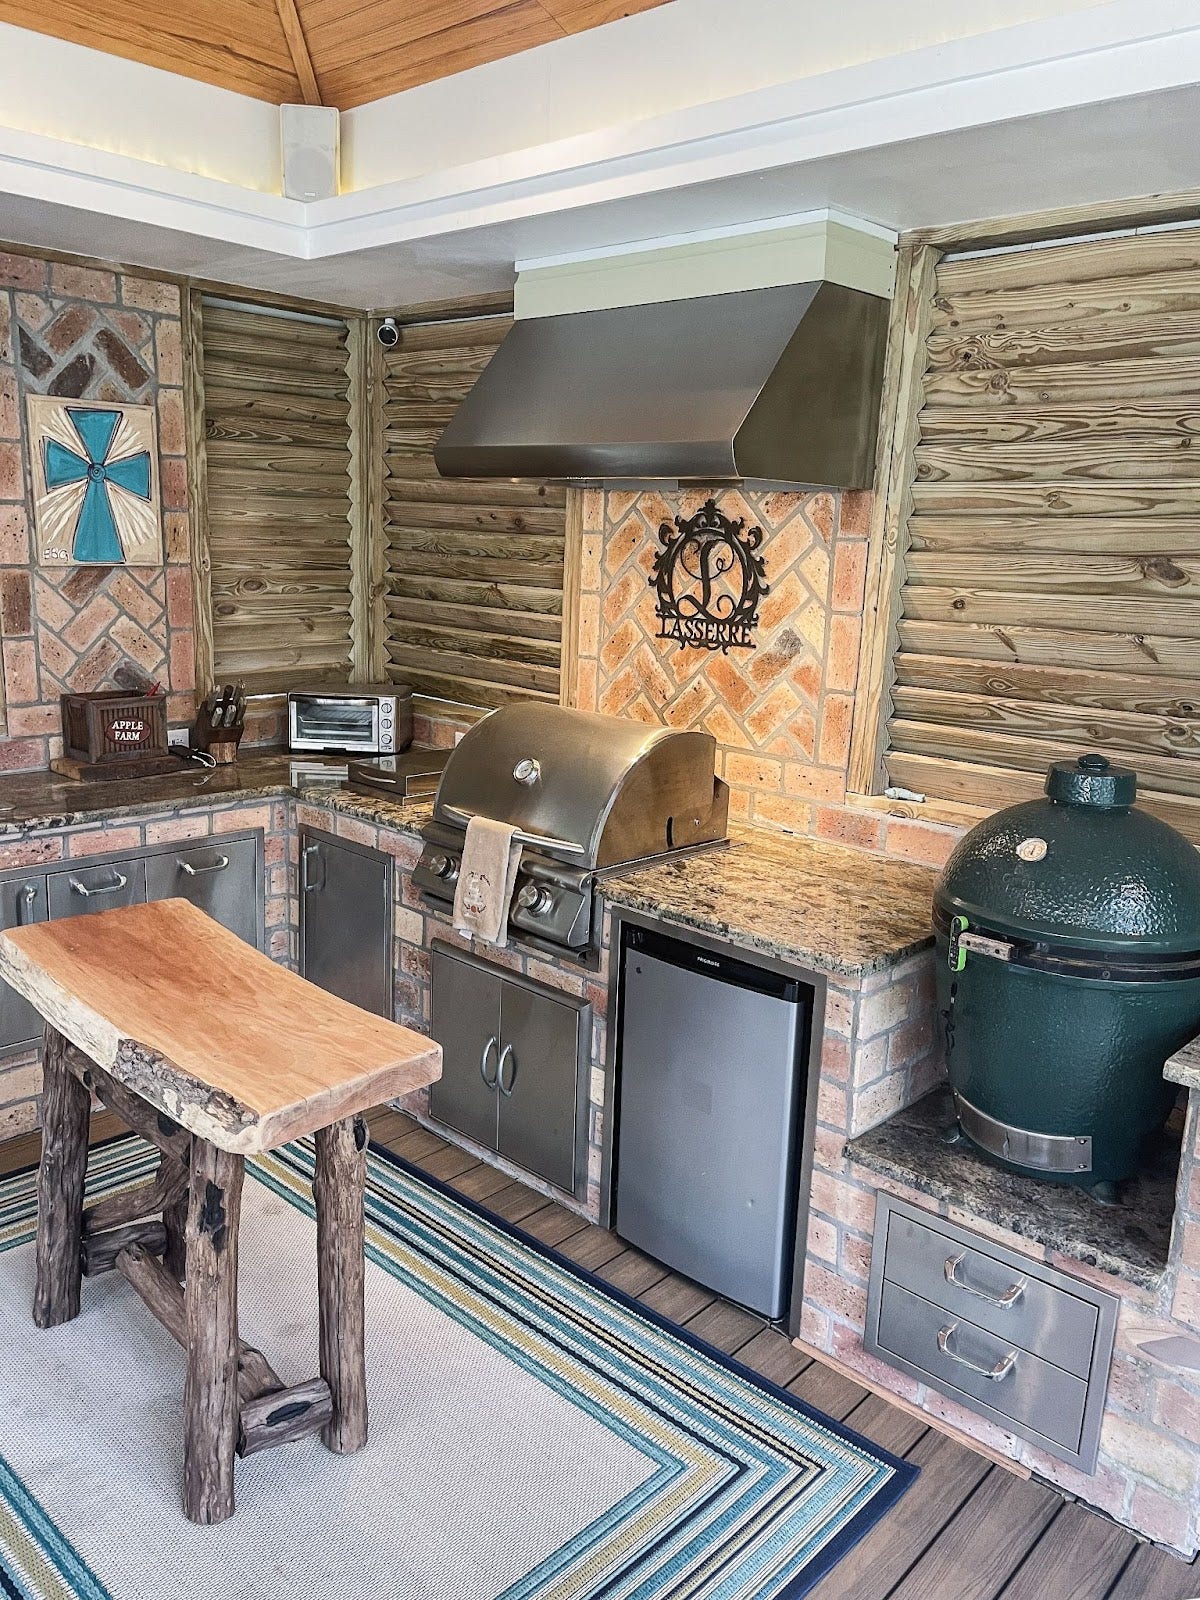 Rustic Comfort Meets Modern Function: Proline PLJW 109 hood keeps the air clear in this cozy outdoor kitchen. Warm brick and natural wood create a charming space for grilling and entertaining, perfect for family meals or social gatherings. - Proline Range Hoods - prolinerangehoods.com 